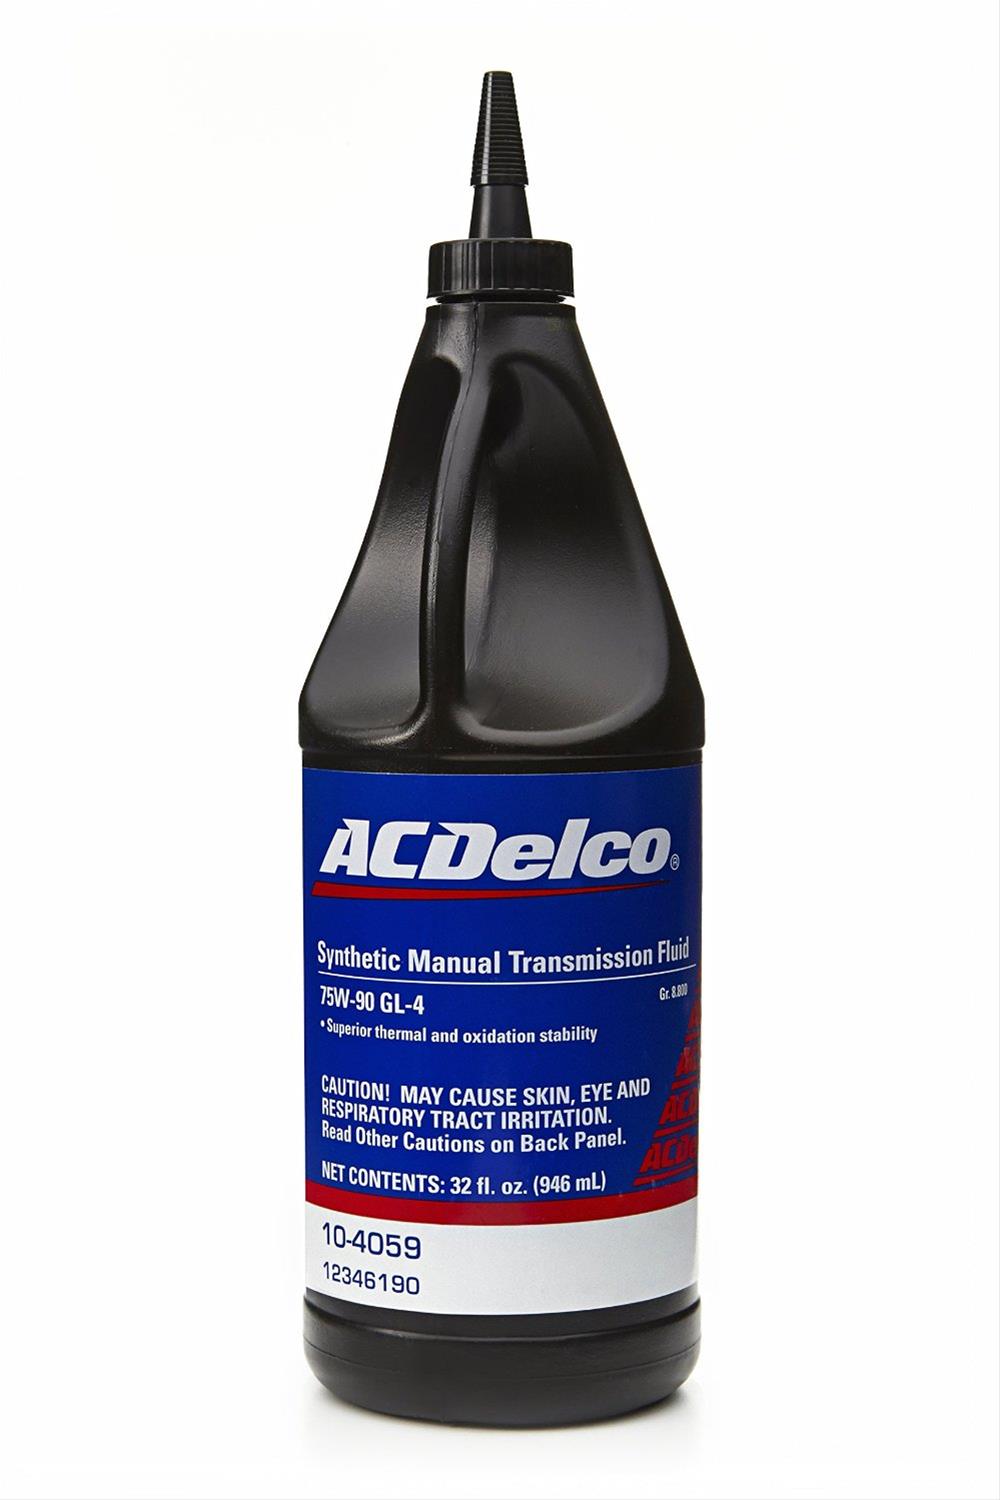 ACDelco 8L90 Transmission Service Kit Mobil1 Fluid For 2015+ Chevy/Cadillac  Cars